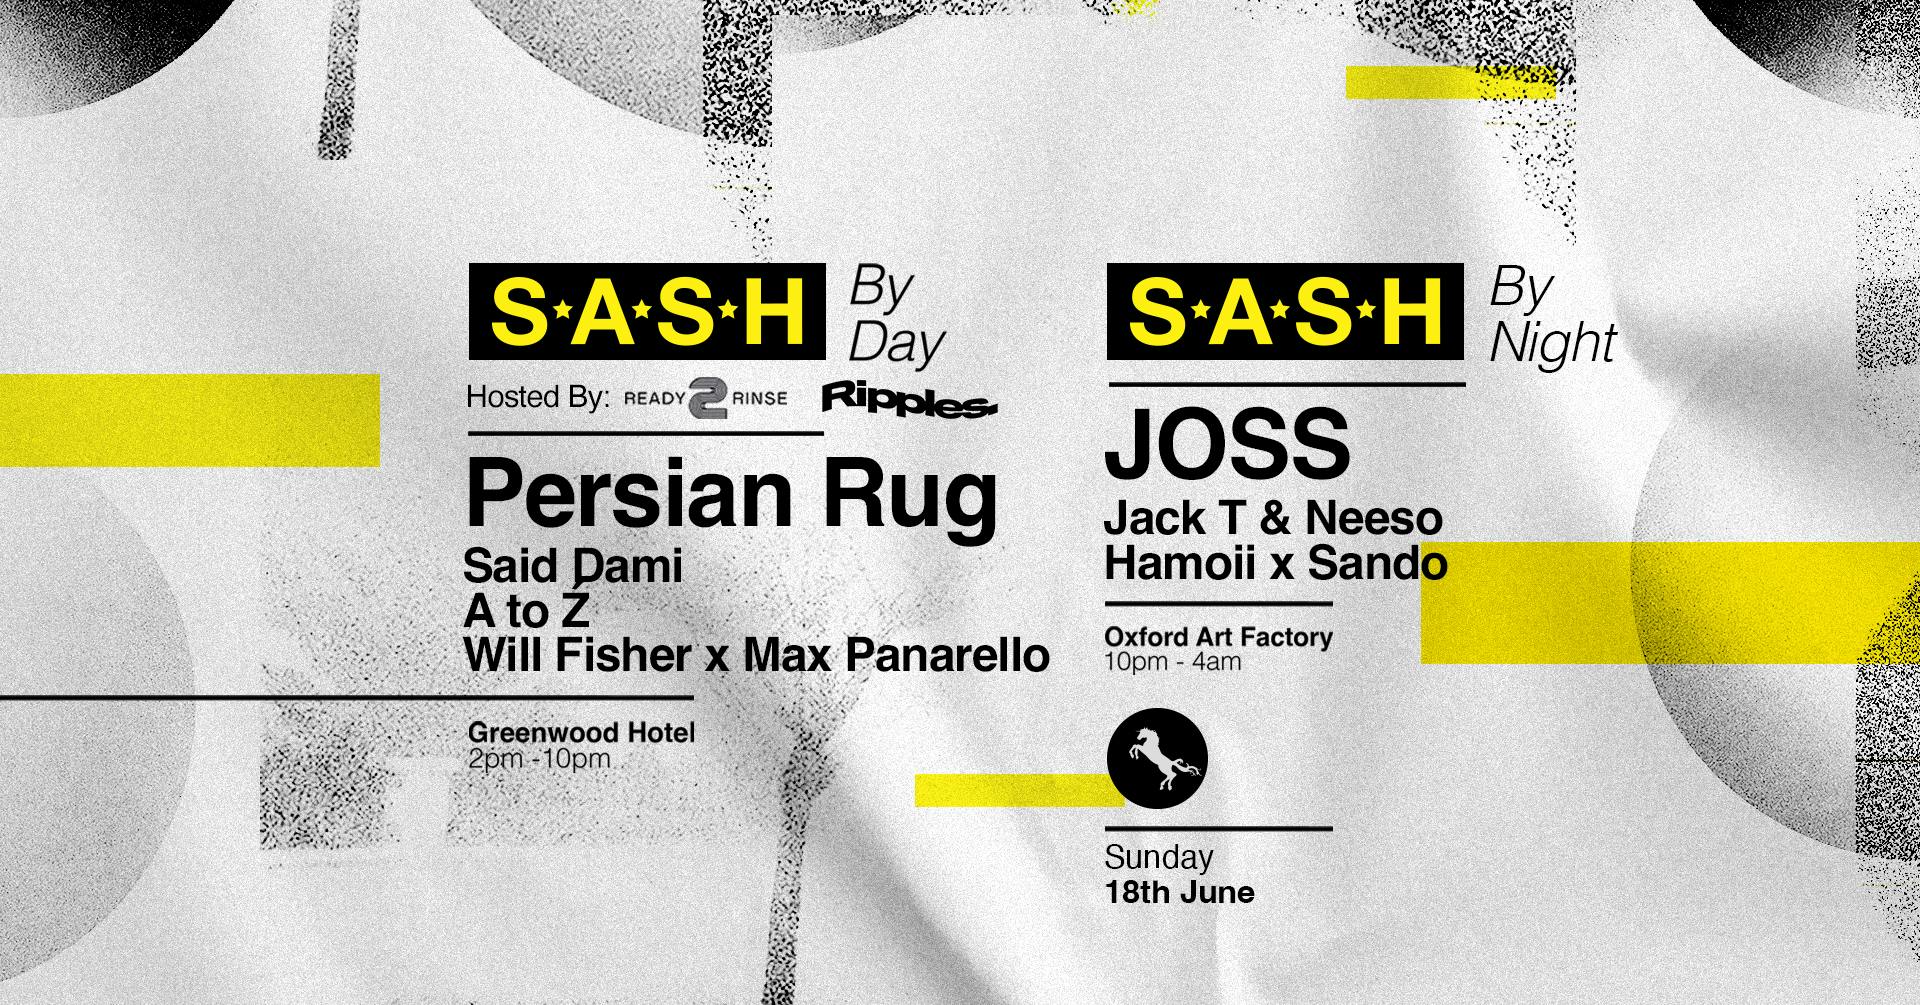 ★ S.A.S.H By Day & Night ★ Ripples x Ready 2 Rinse ★ JOSS ★ Sunday 18th June ★